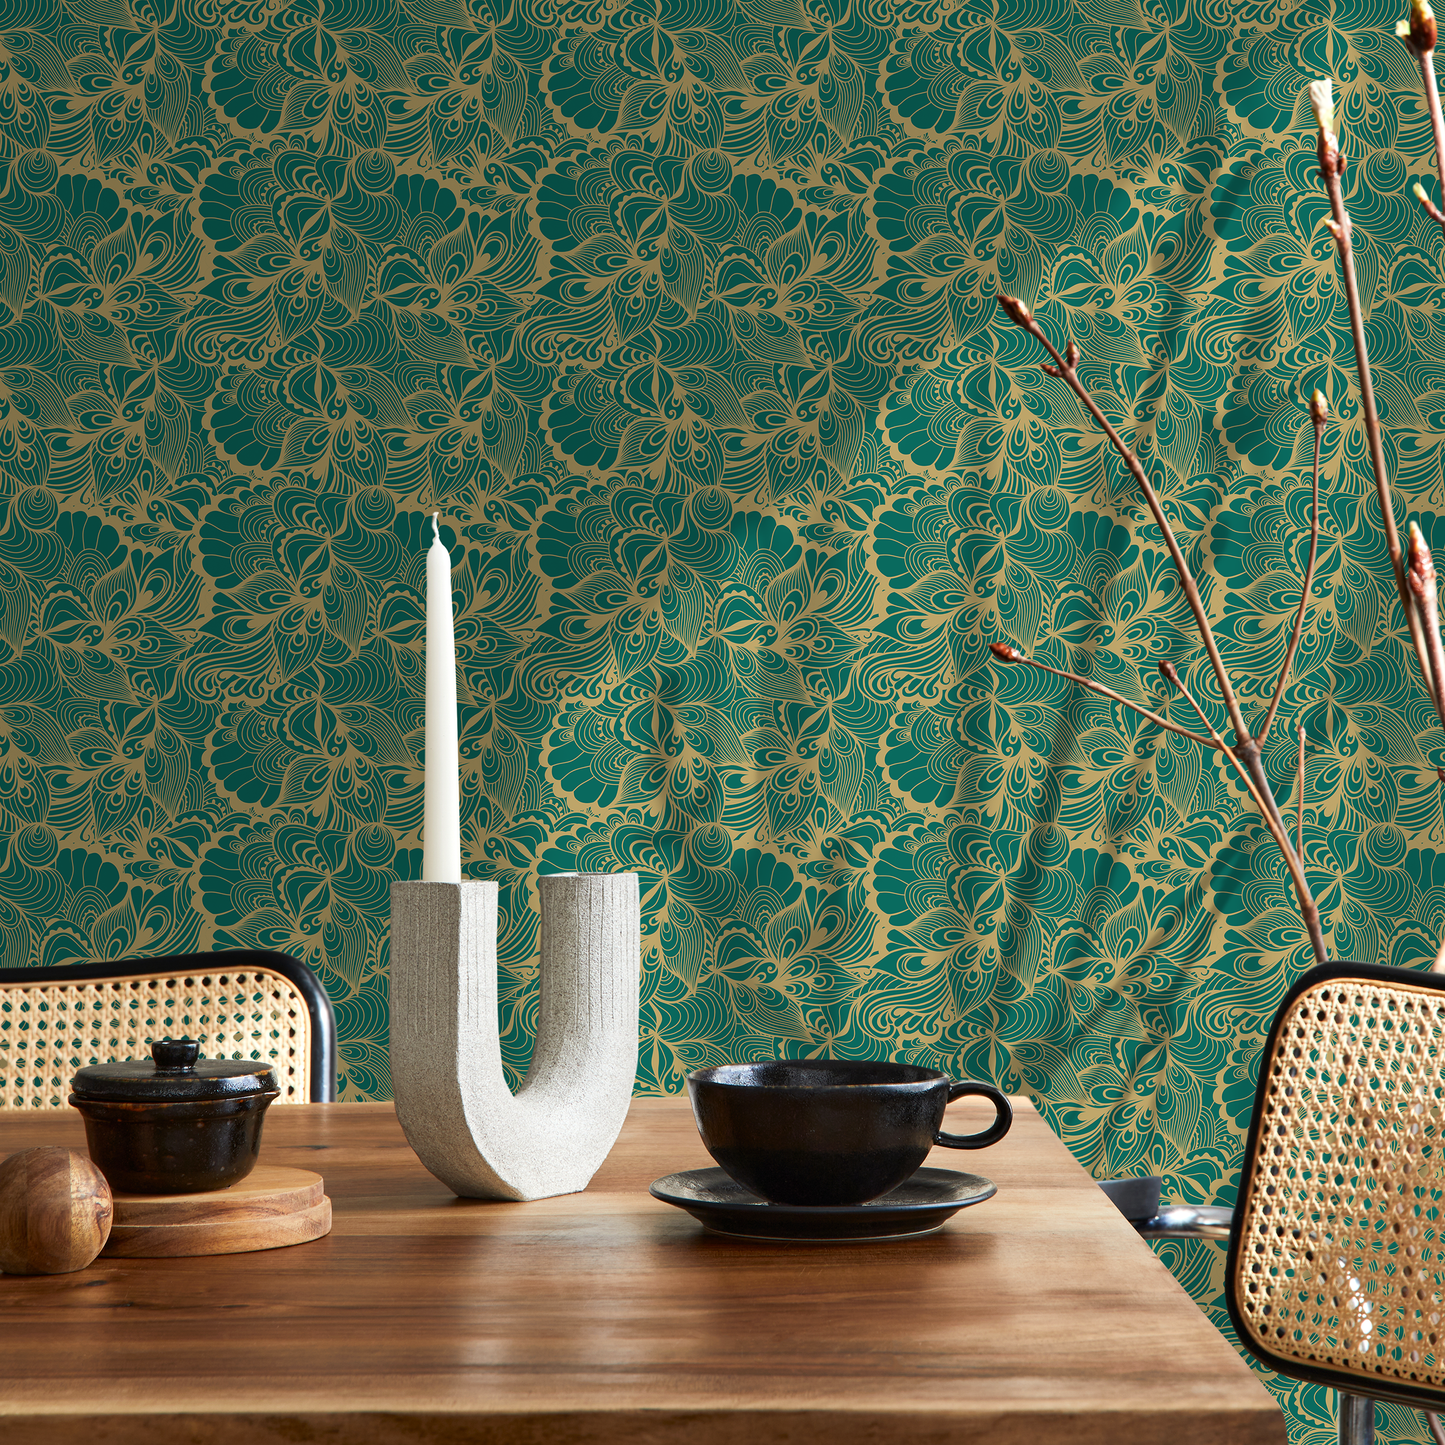 Green Abstract Leaf Wallpaper Peel and Stick and Traditional Wallpaper - B561